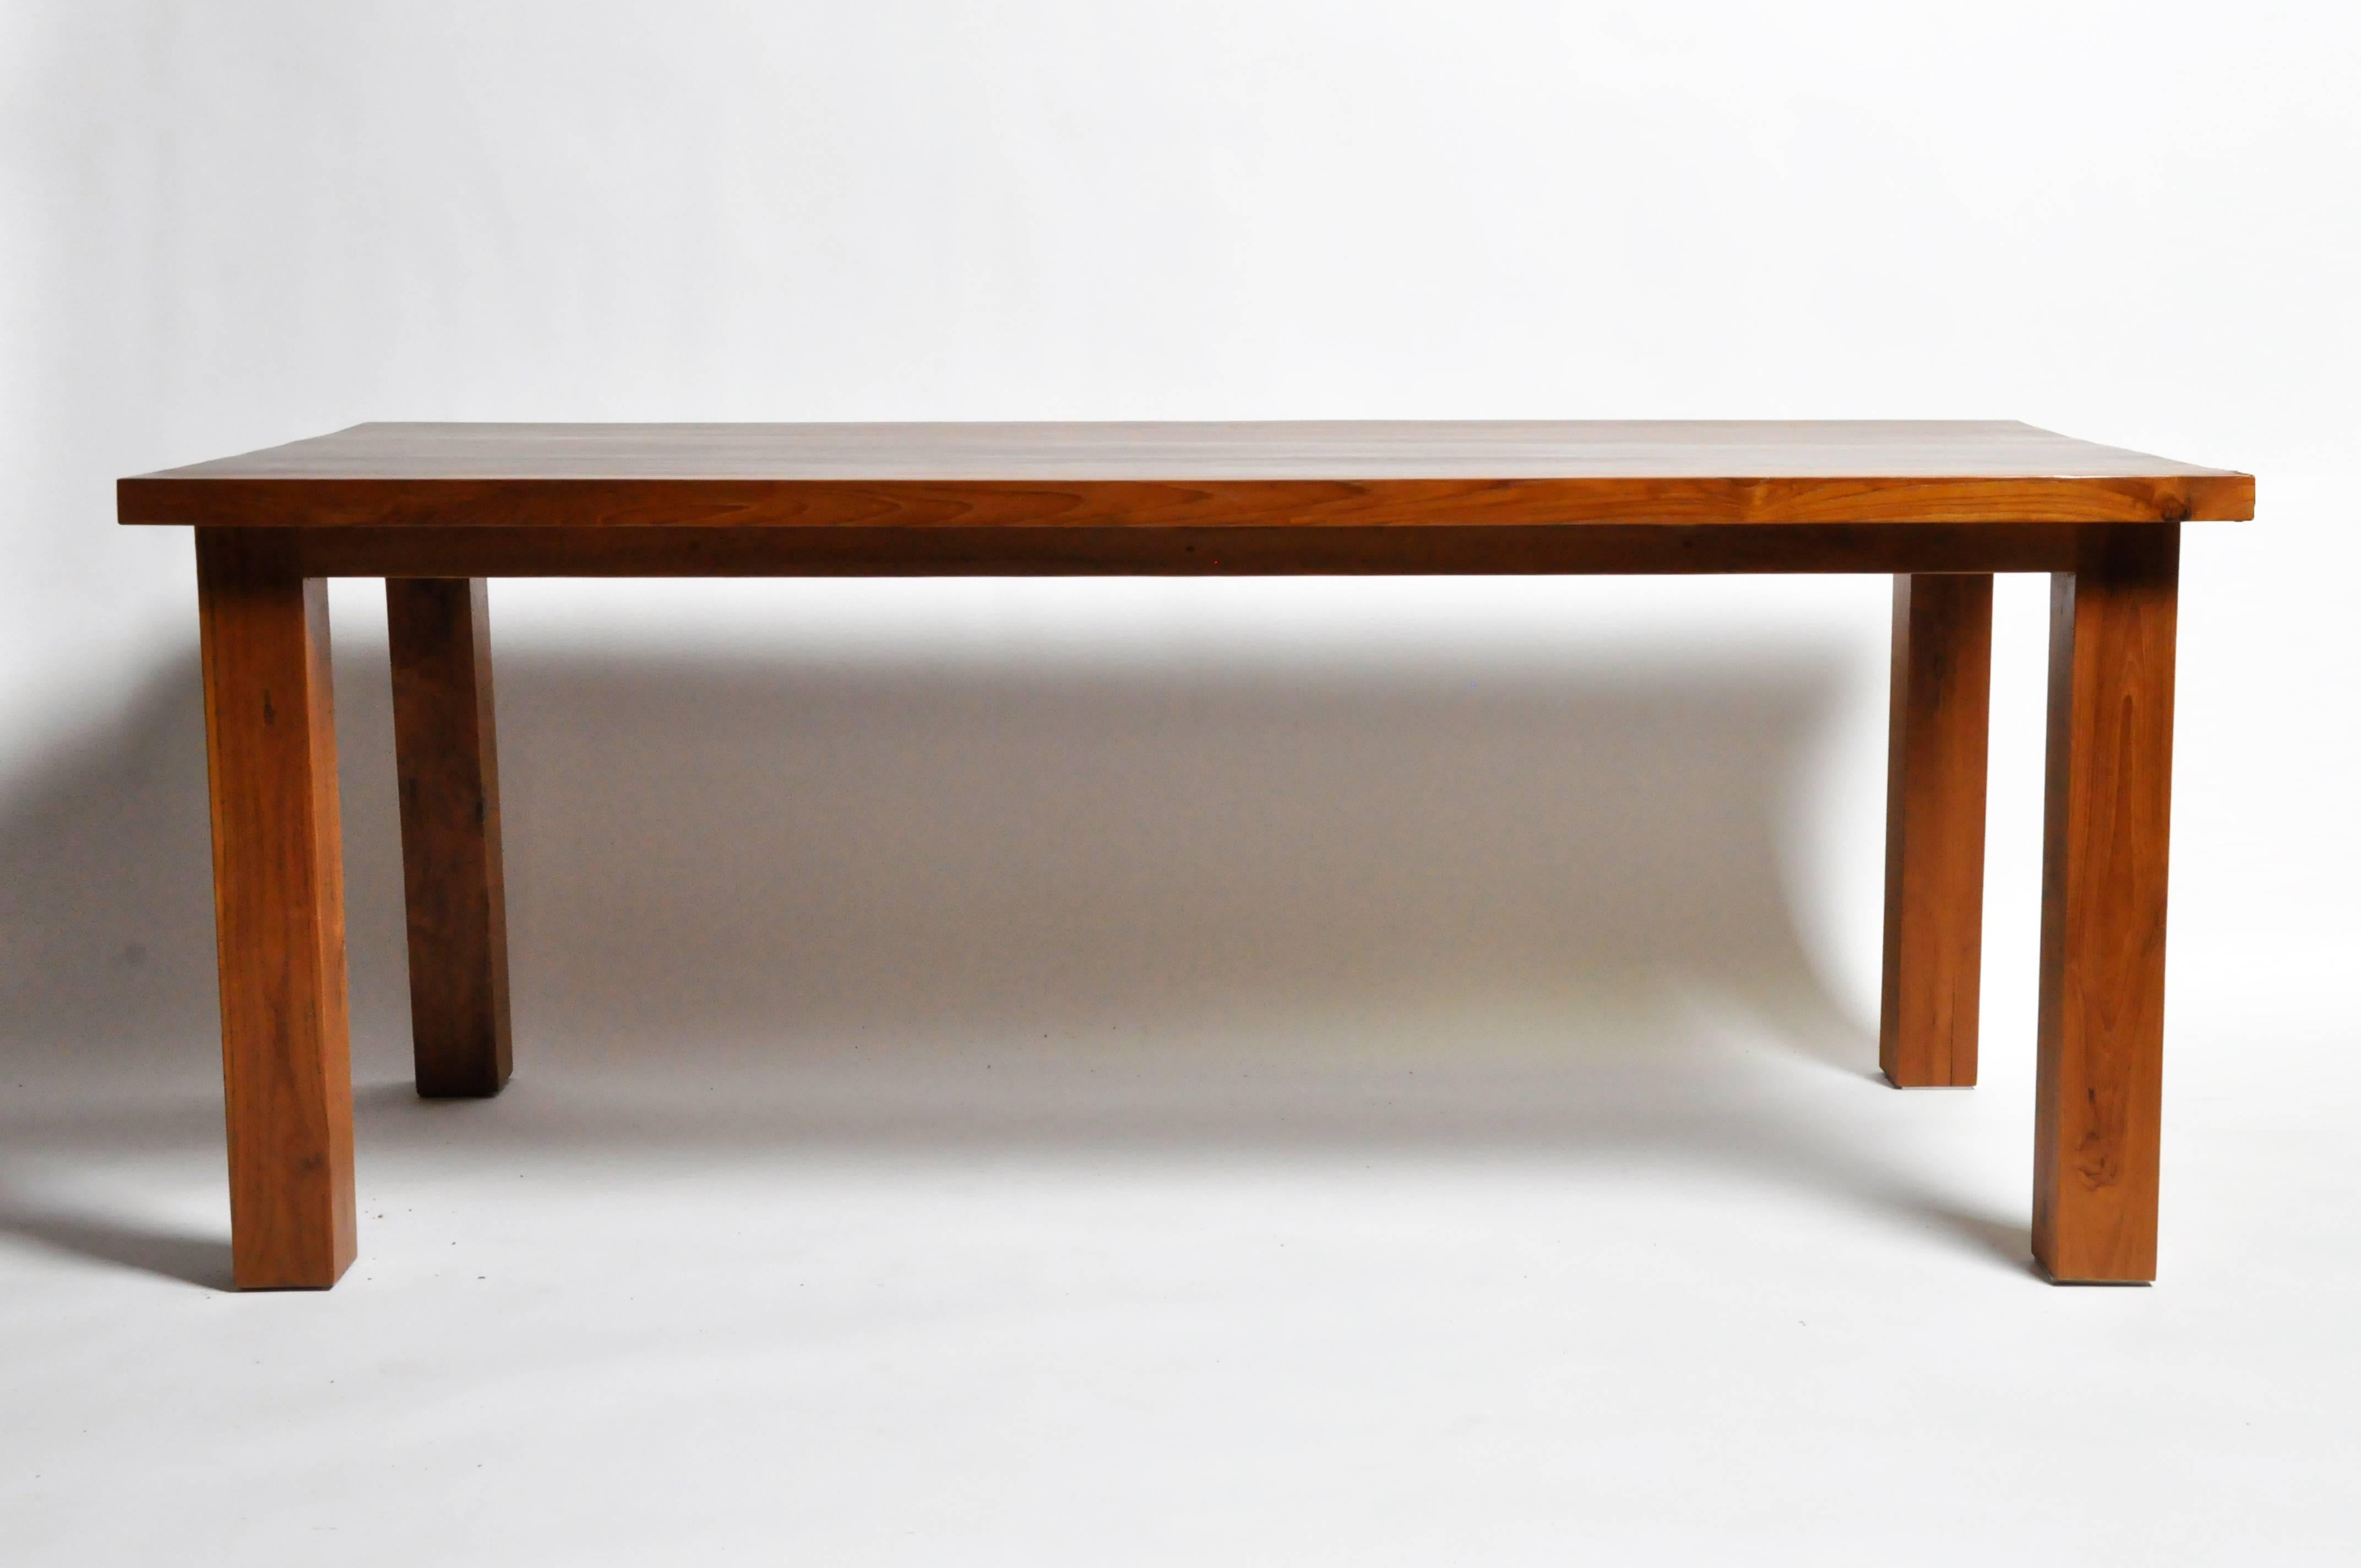 This newly made dining table is from Chiang Mai, Thailand and was made from teak wood. Strong and sturdy this table also has a natural insect repellent from the teak wood.